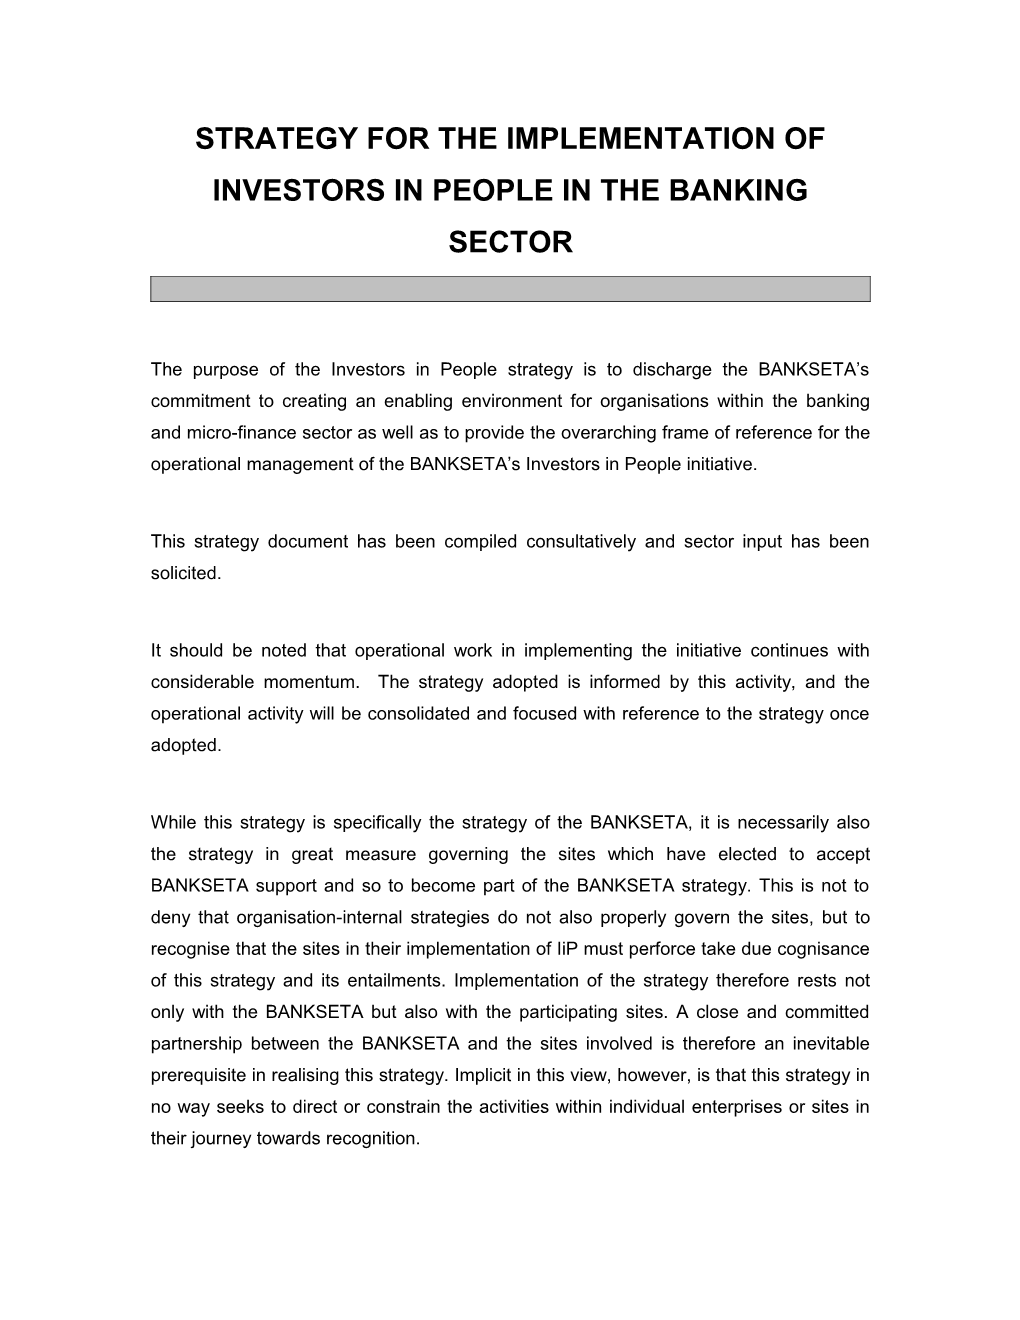 Strategy for the Implementation of Investors in People in the Banking Sector